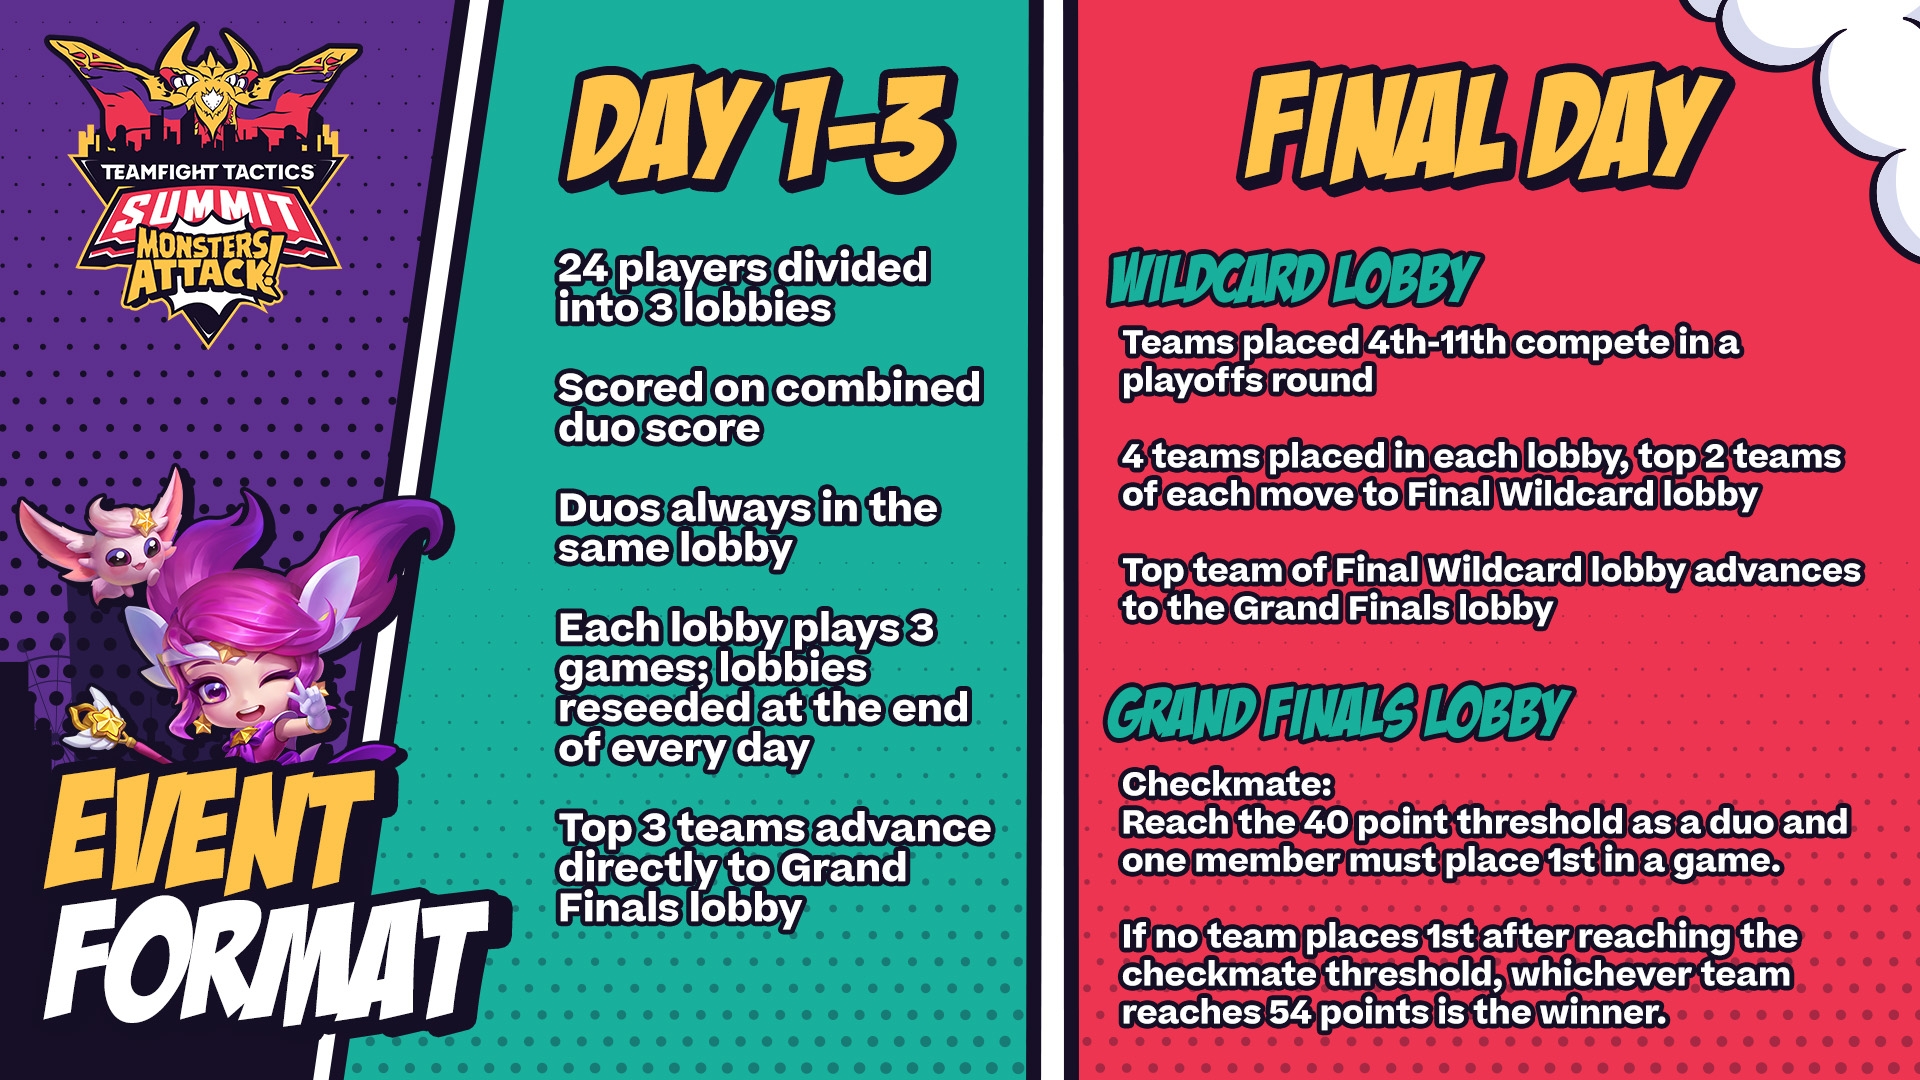 A graphic detailing format of play. Day 1-3 will start with 24 players divided into 3 lobbies. Players will be scored on combined duo score, duos always in the same lobby. Each lobby plays 3 games; lobbies re-seeded at the end of every day. Top 3 teams advance to the grand finals lobby. Final Day is Wildcard and Grand Finals Lobby’s. Wildcard Lobby: Teams placed 4-11 compete in the playoffs to advance to the Grand Finals lobby. Grand finals lobby ends in checkmate: reach the 40 point threshold as a duo and one member must place 1st in a game. If no checkmate is reached, first team to 54 pts.